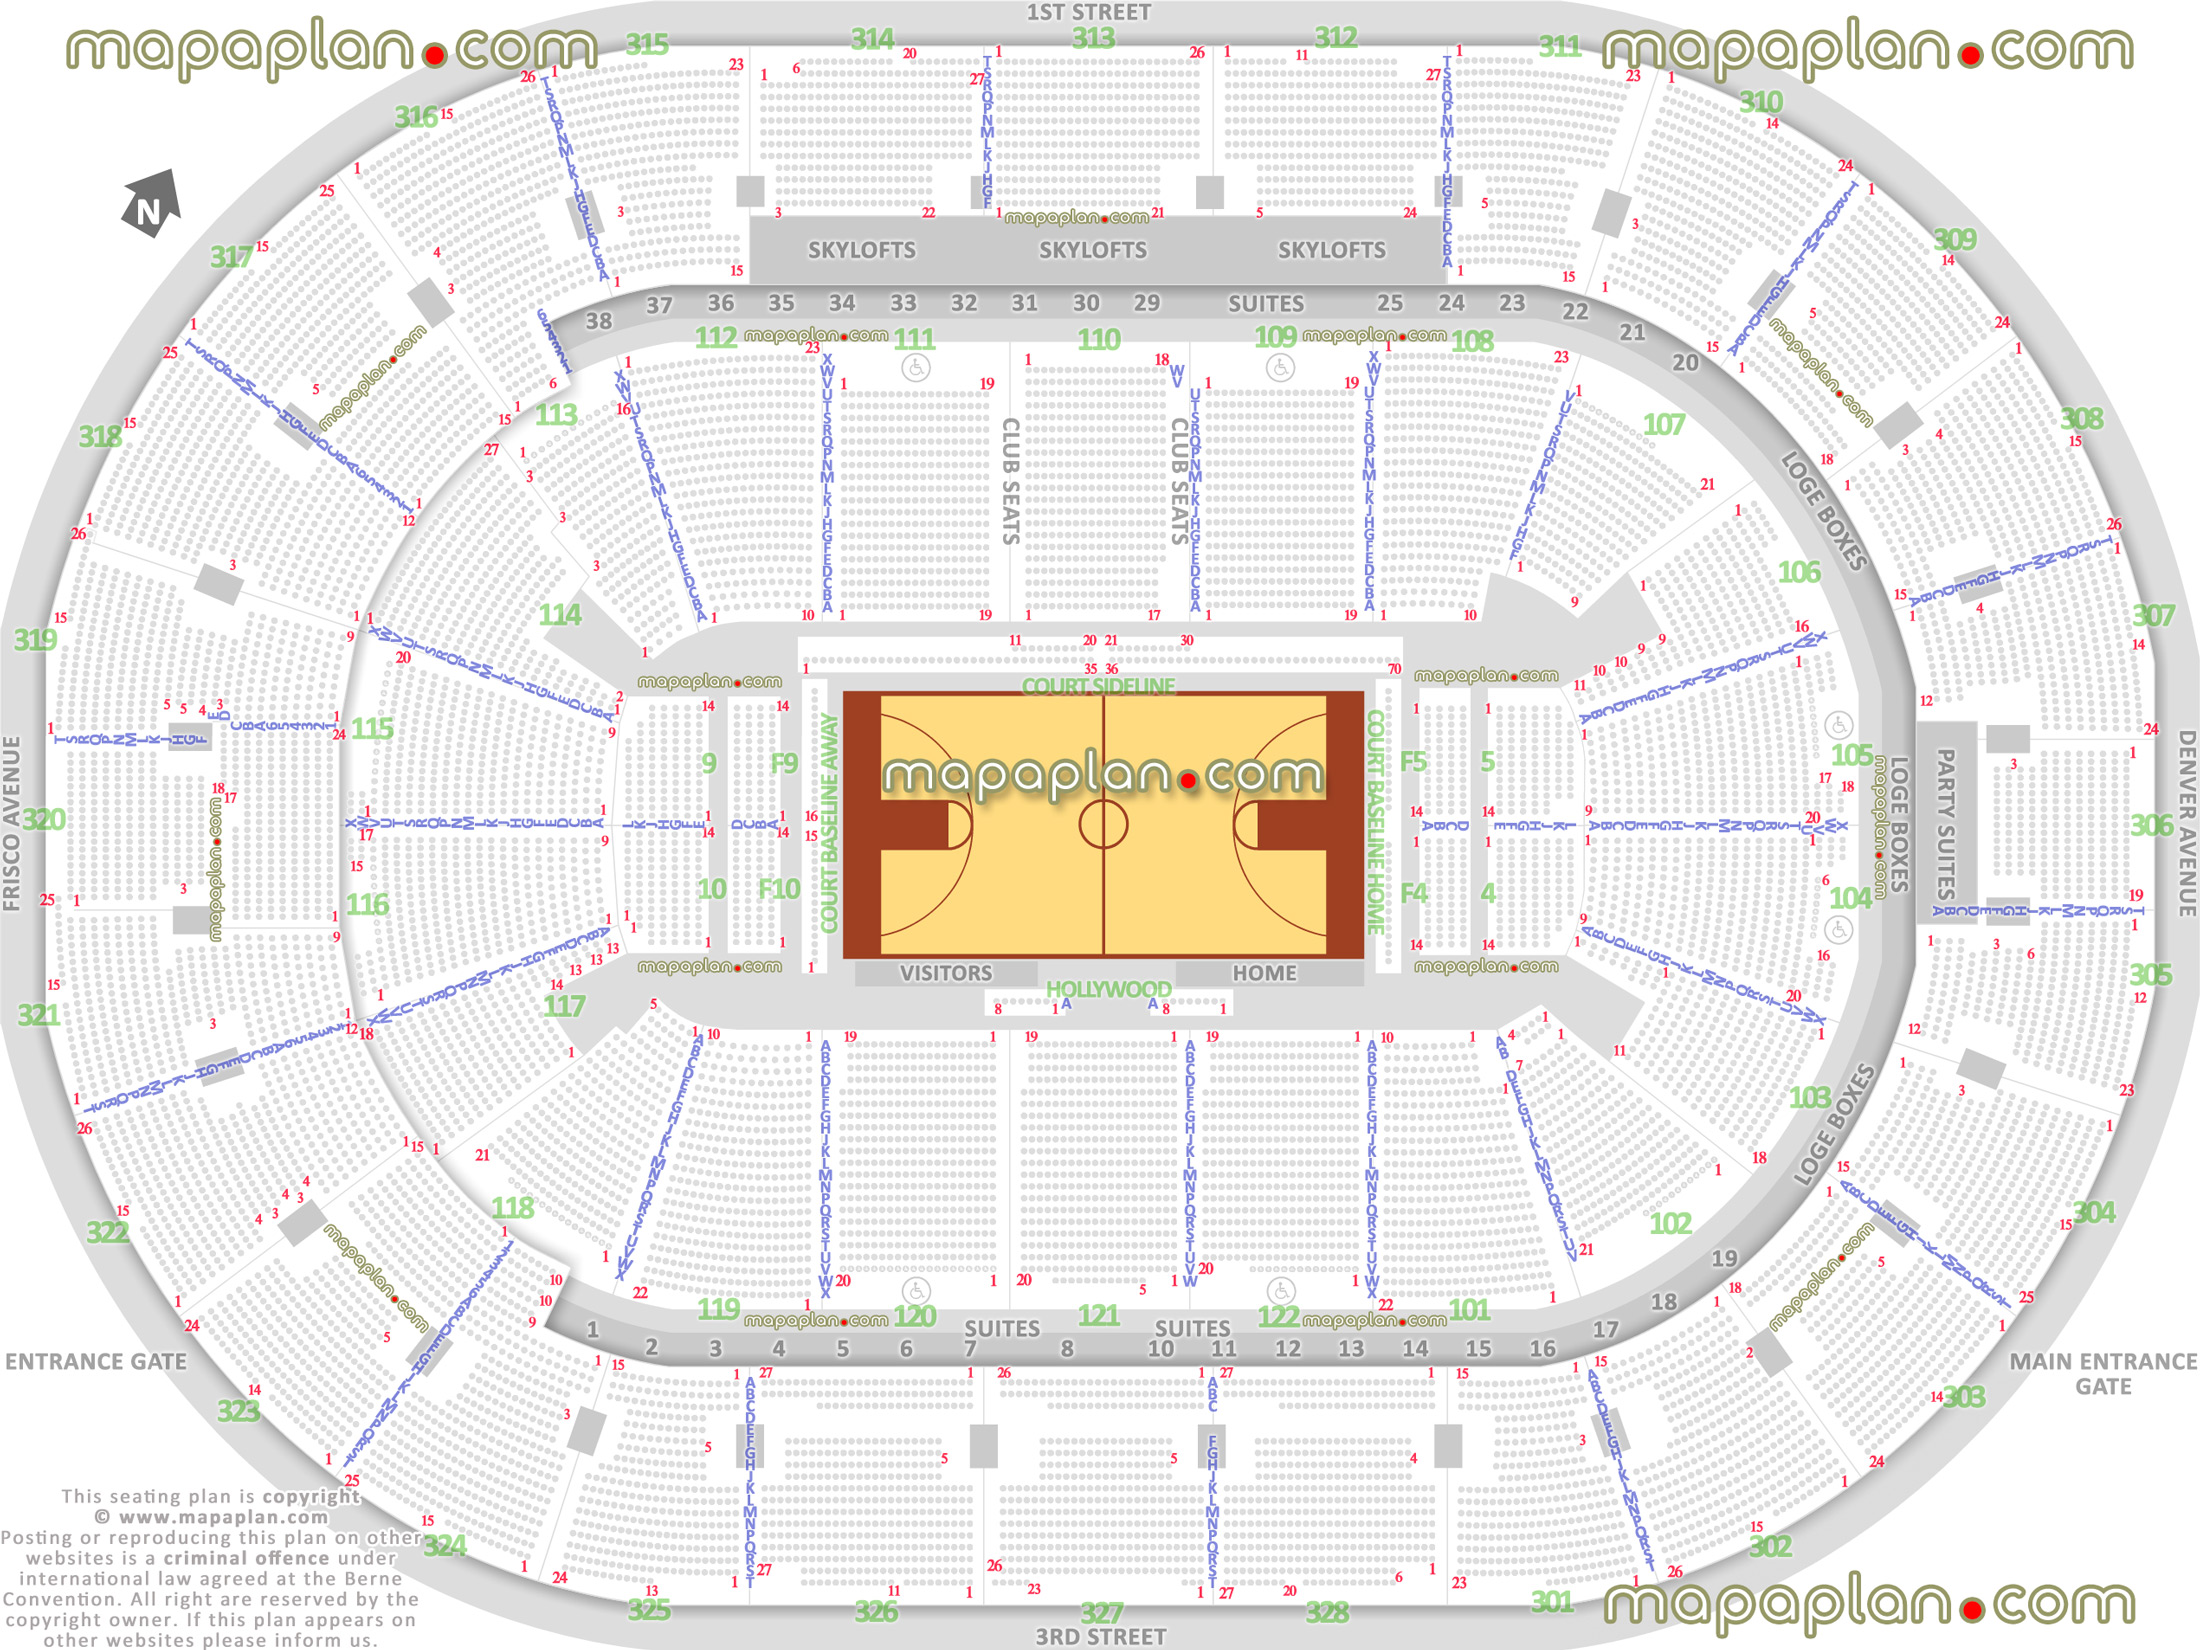 tulsa shock wnba basketball arena stadium map individual find seat locator how seats rows numbered lower upper level bowl club level skylofts Tulsa BOK Center seating chart